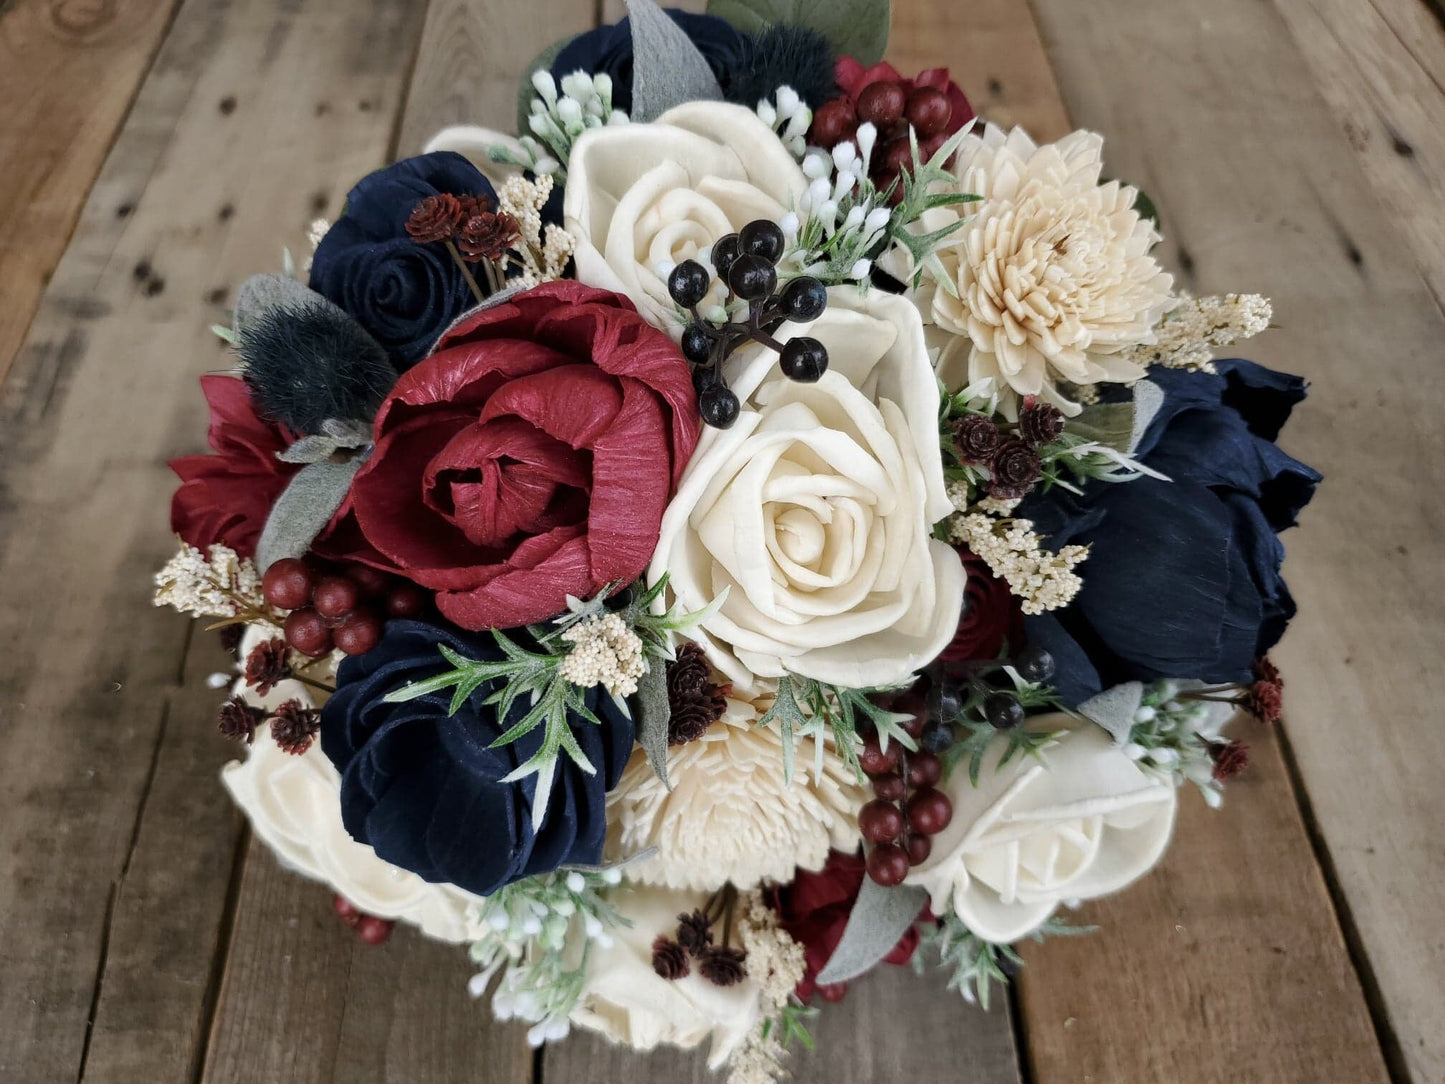 Wood Flower Bouquet, Navy and Burgundy Bridal Bouquet, Burgundy Wedding Bouquet, Wooden Flower Bouquet, Sola Wood Flowers